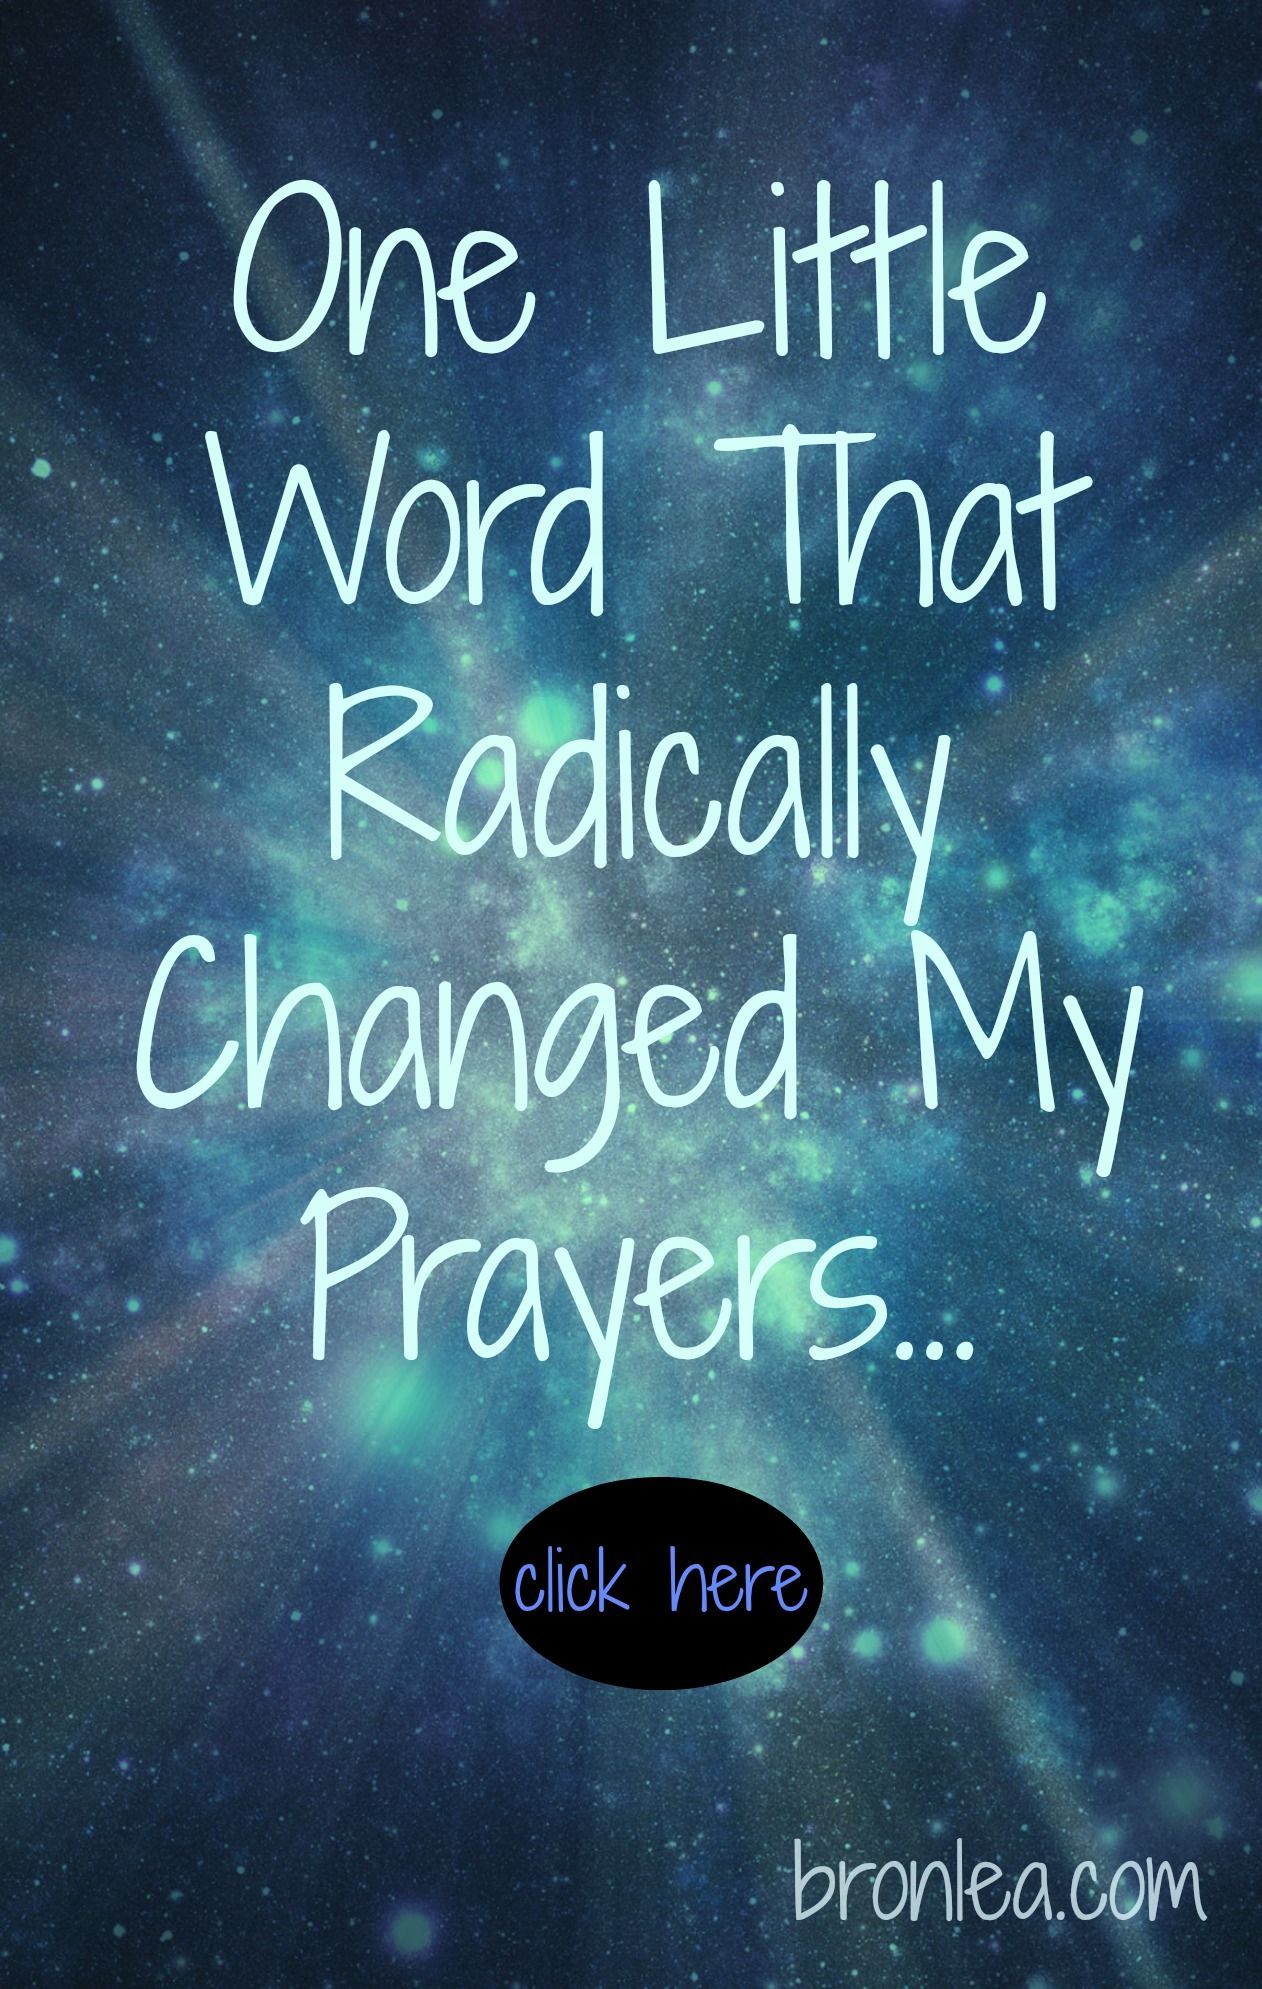 One Little Word That Radically Changed My Prayers: Oh God, Make It Count!